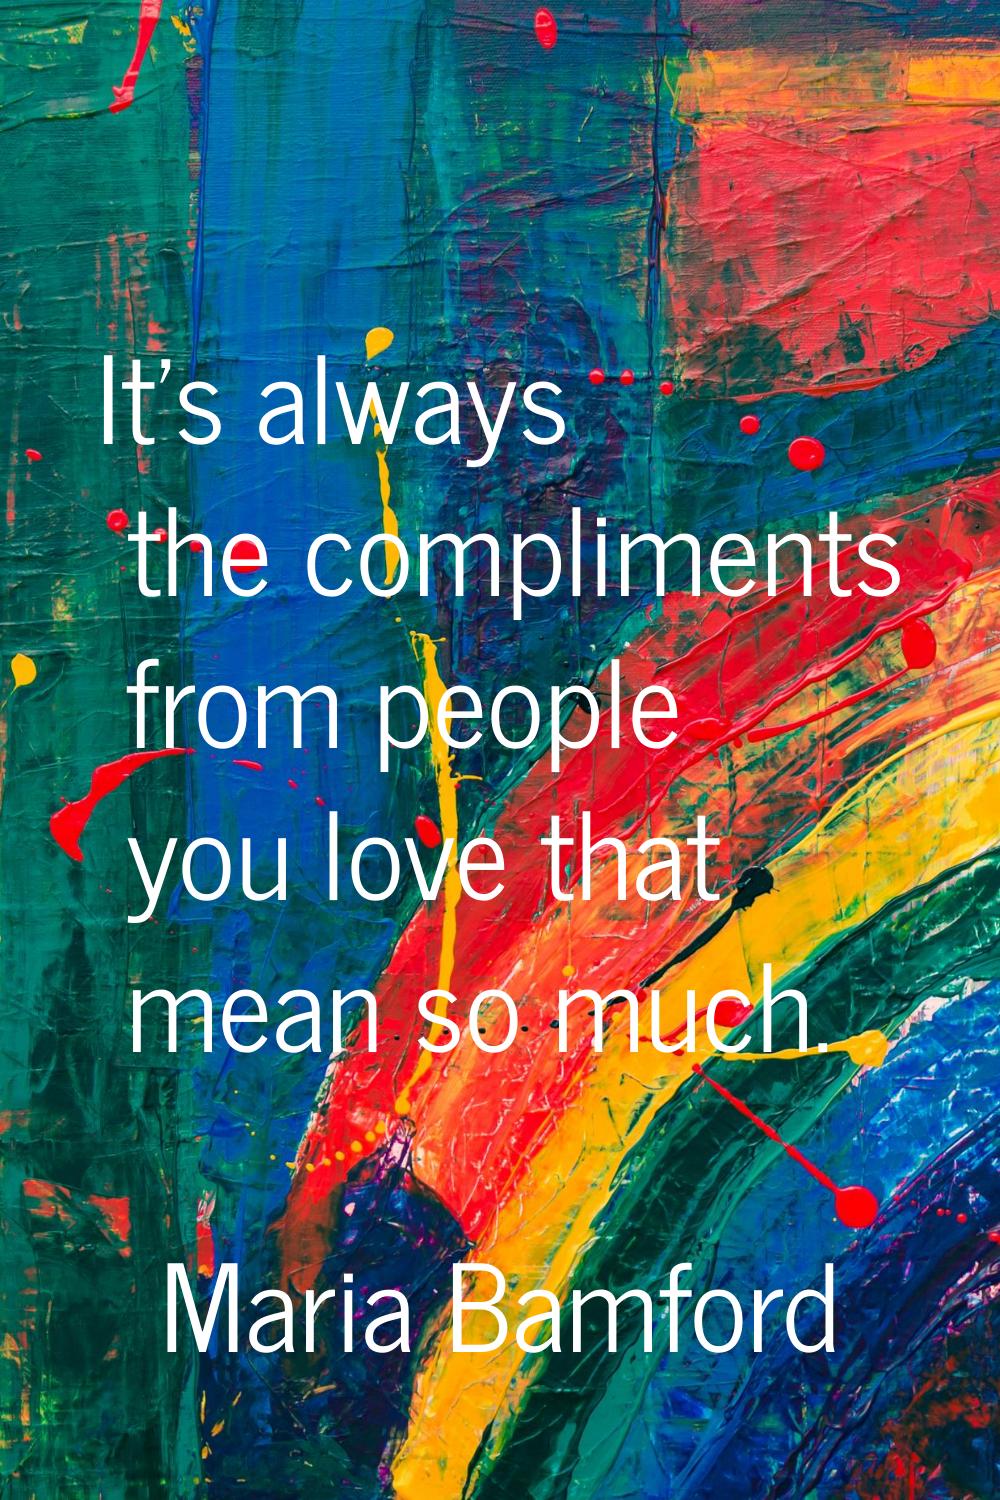 It's always the compliments from people you love that mean so much.